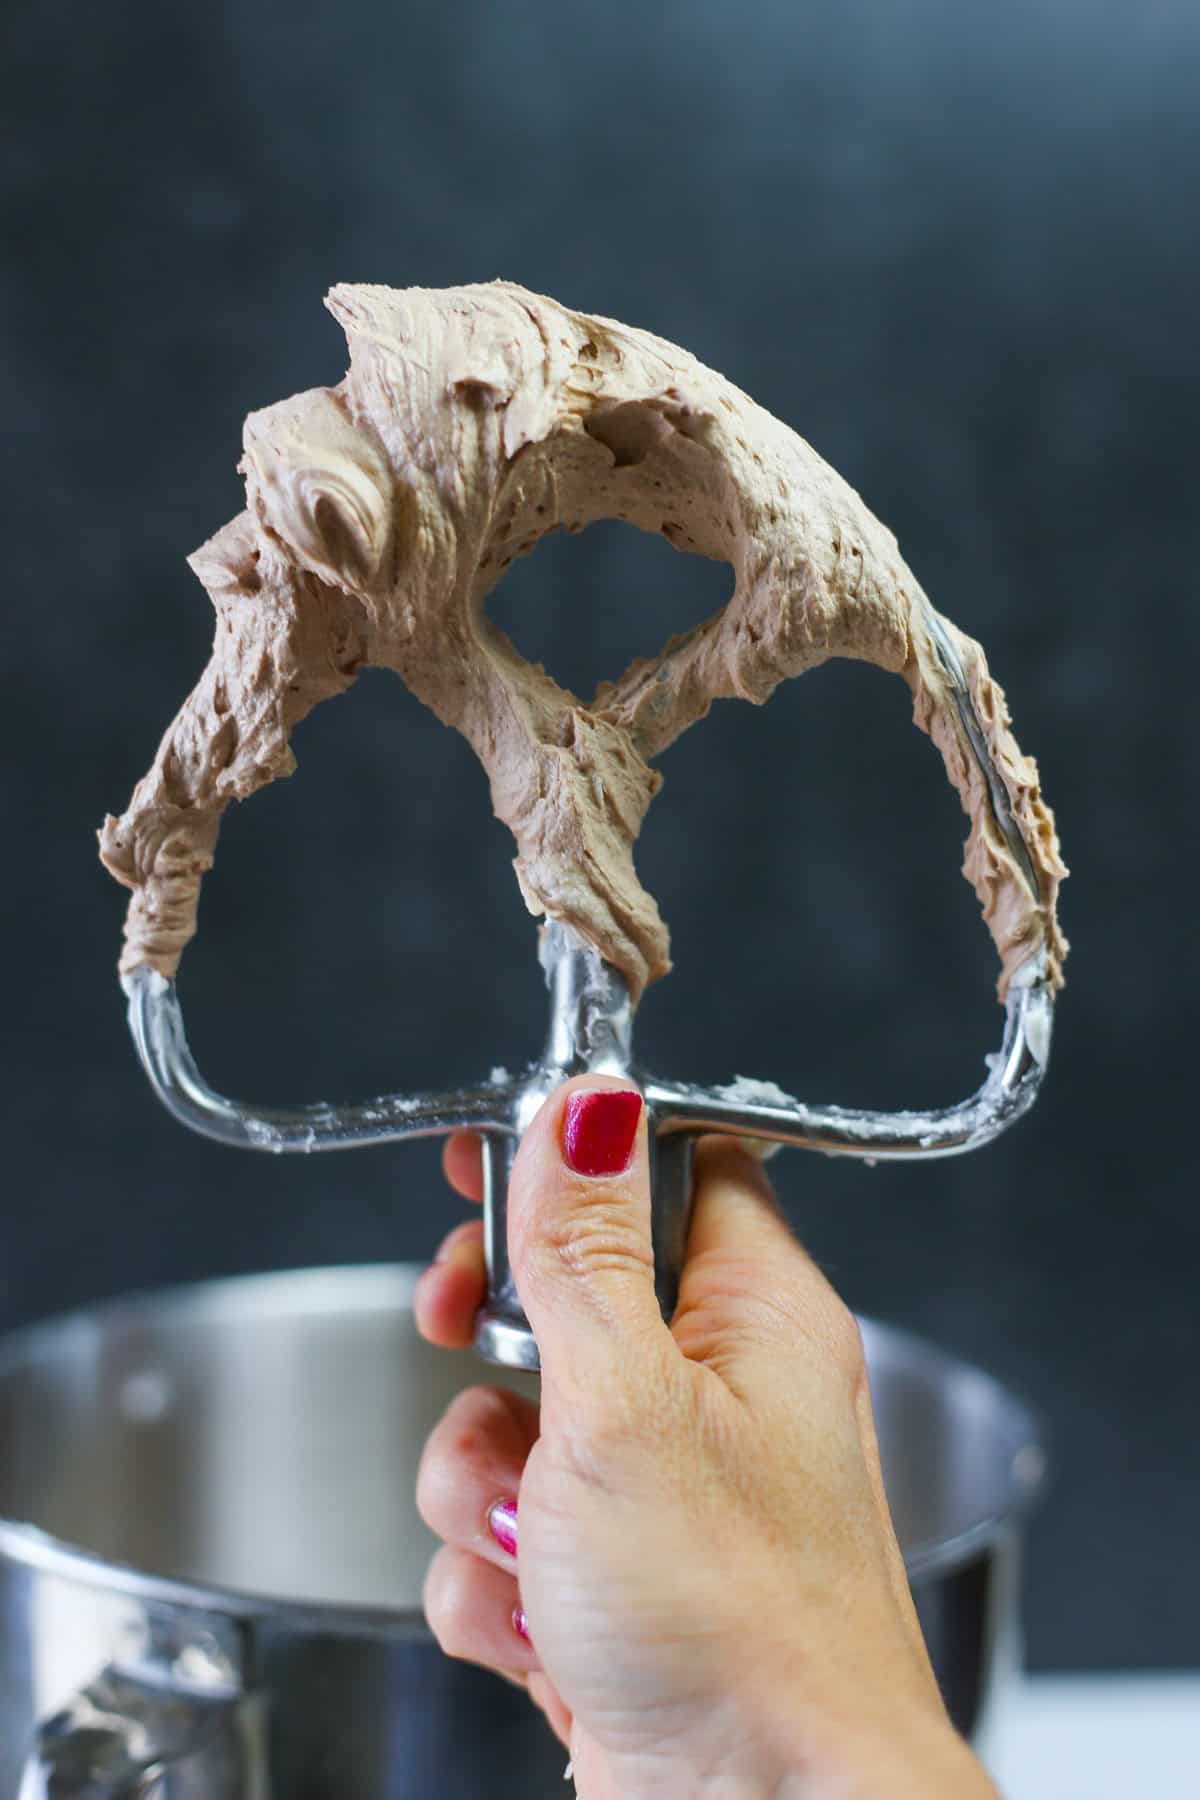 A hand holding up a mixer paddle attachment covered in chocolate buttercream frosting.